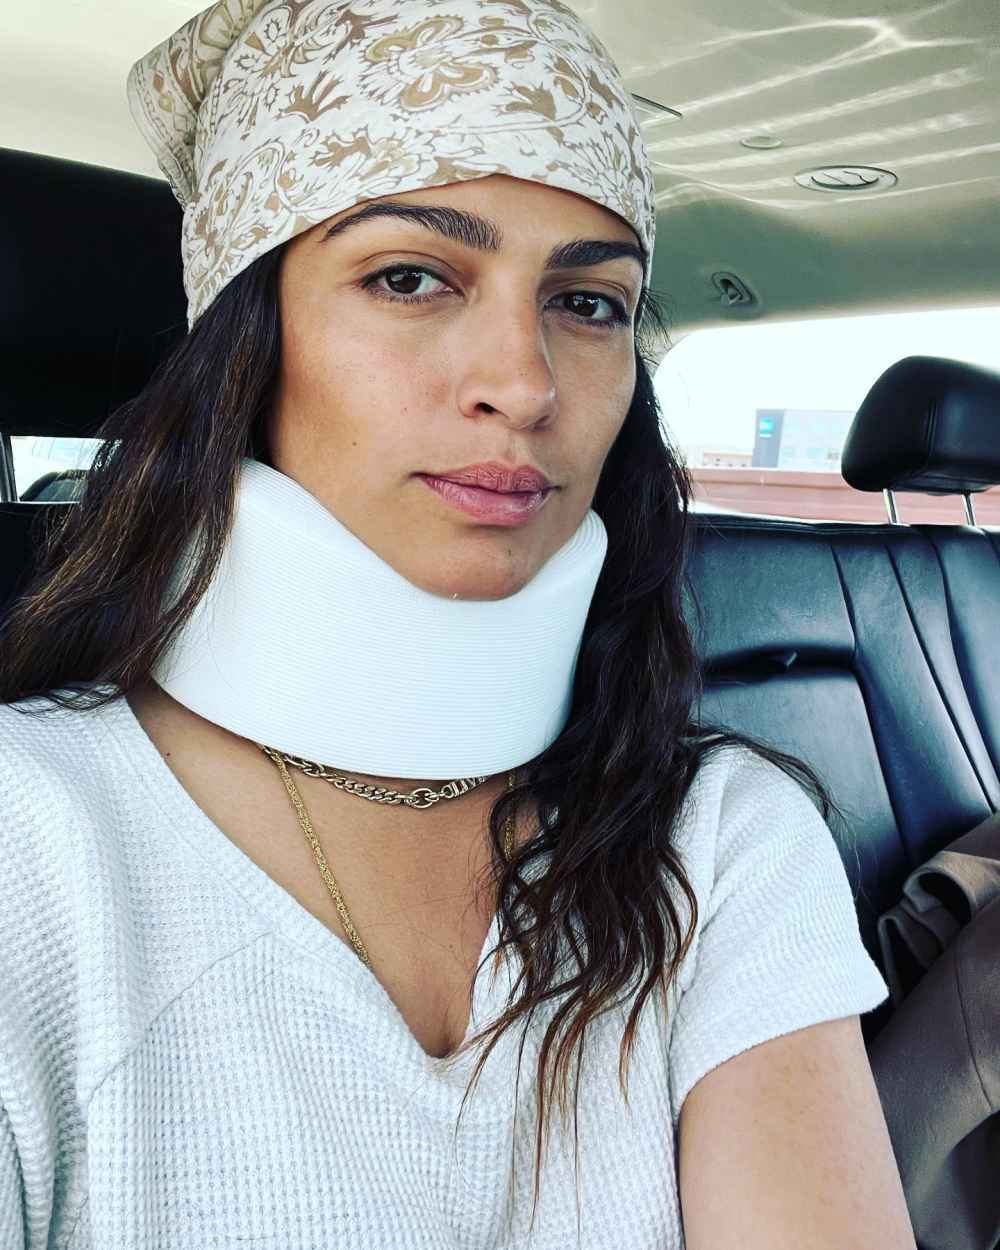 Camila Alves Says ‘S—t Happens’ After Falling Down the Stairs, Reveals Neck Brace